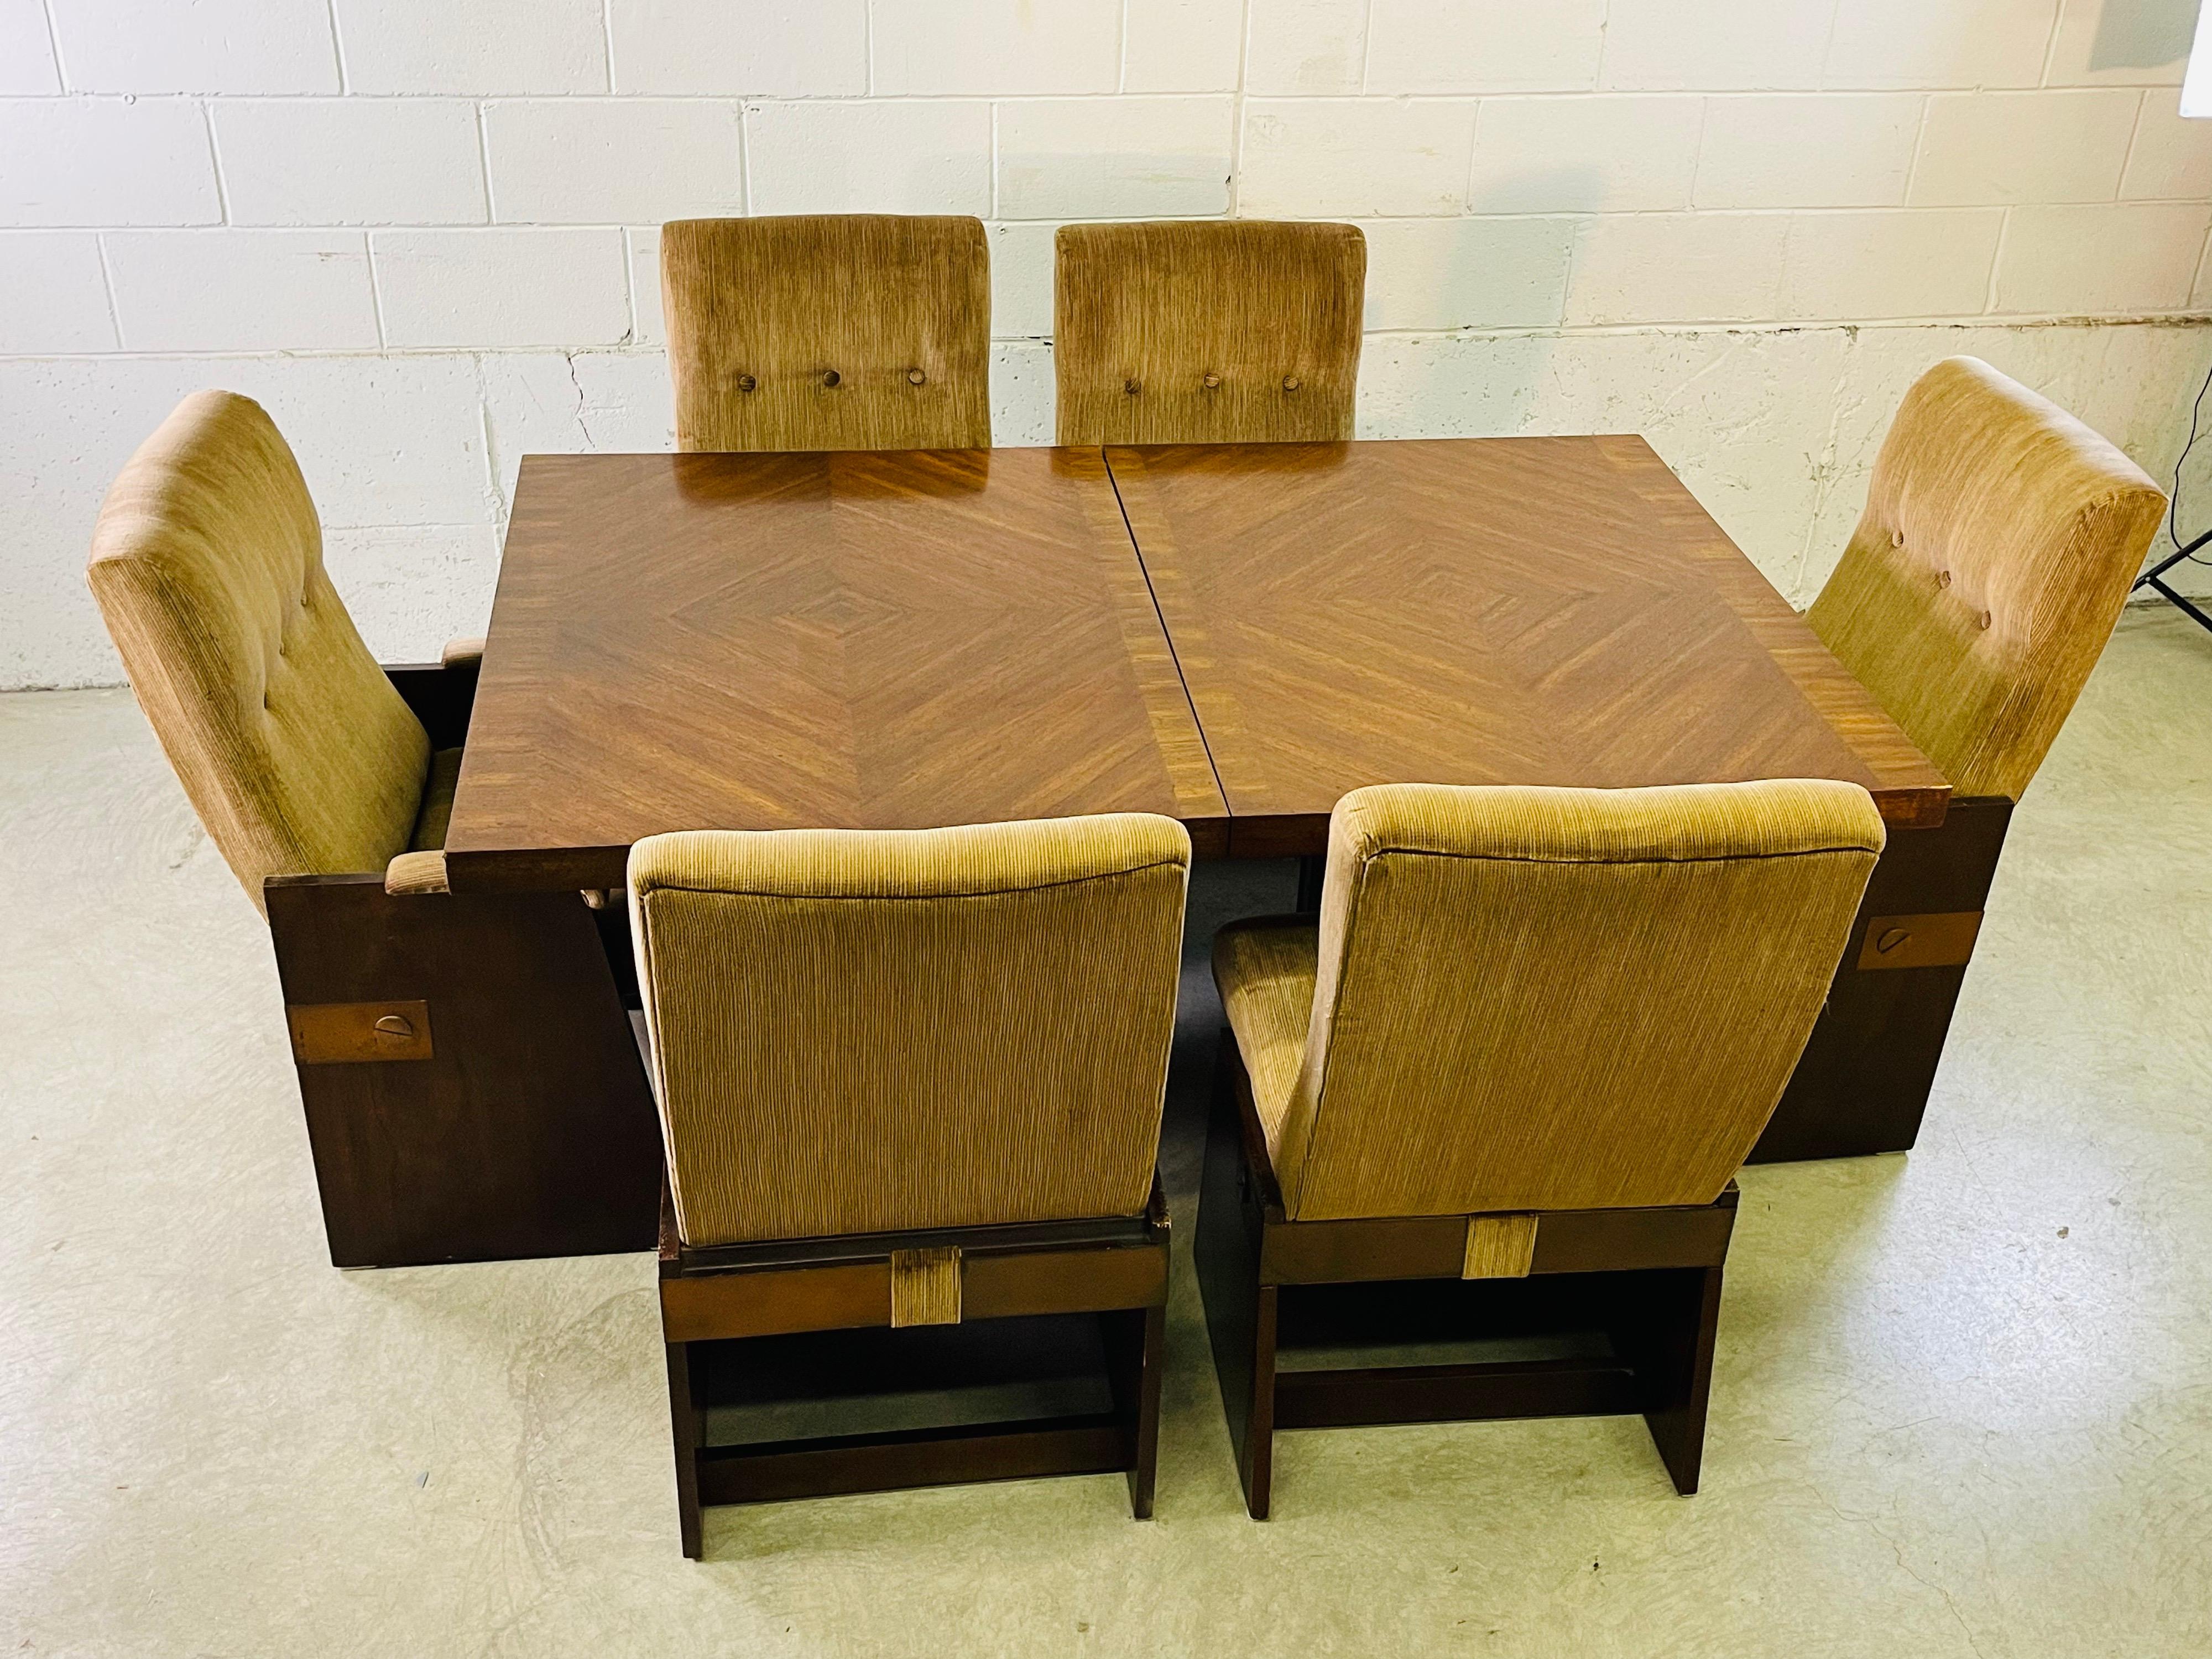 Vintage 1970s Lane Furniture Co Brutalist style dining room table with six chairs. The table has a nice inlaid chevron design. The table comes with six chairs; two chairs are captain chairs. The set also comes with two extra boards to expand the